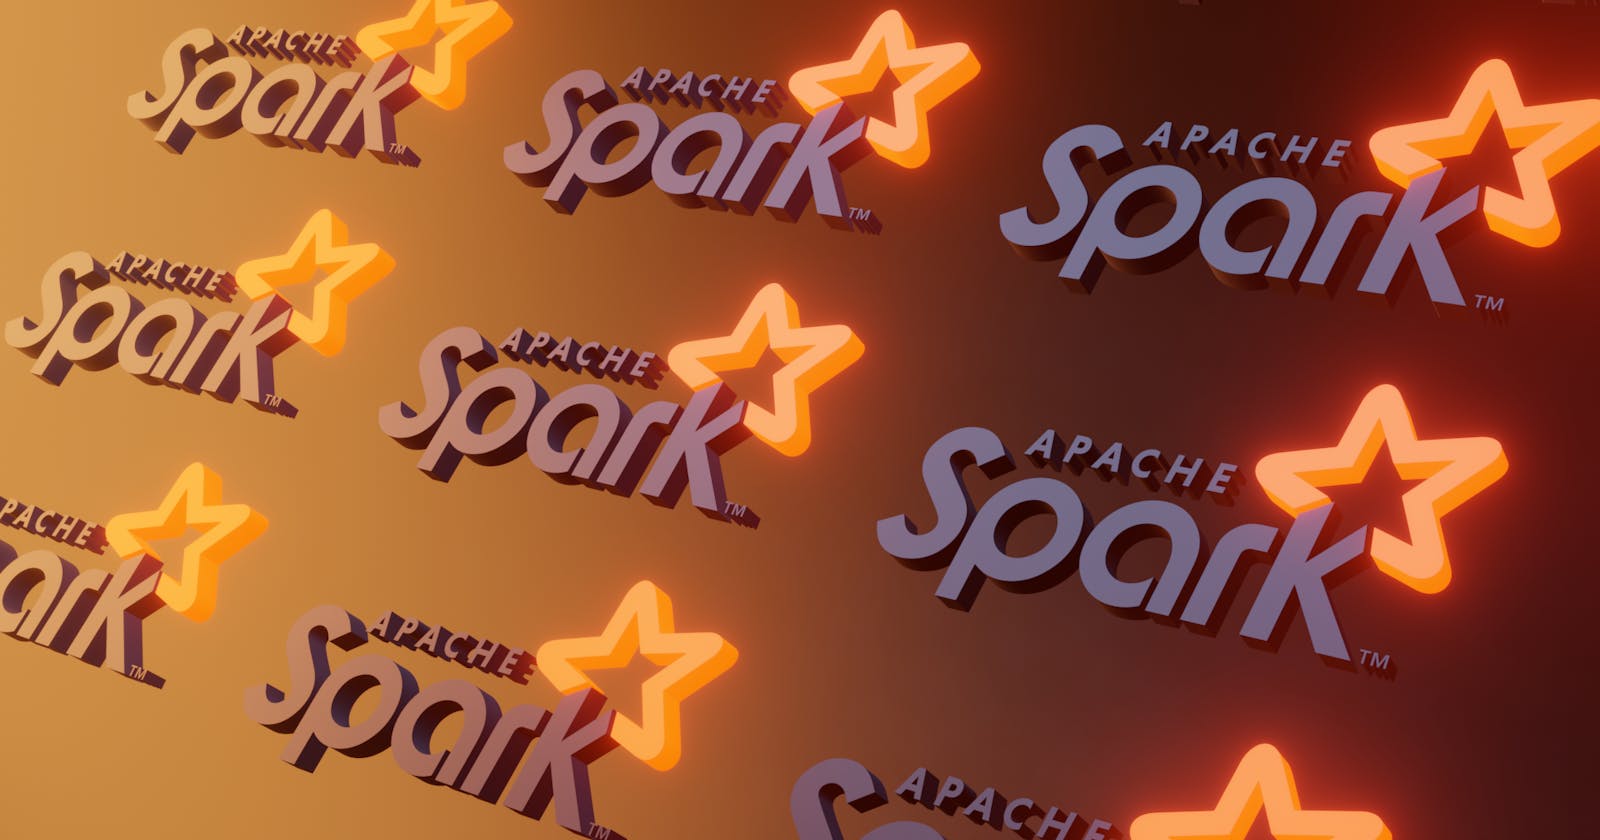 What's new in Apache Spark 3.3.0